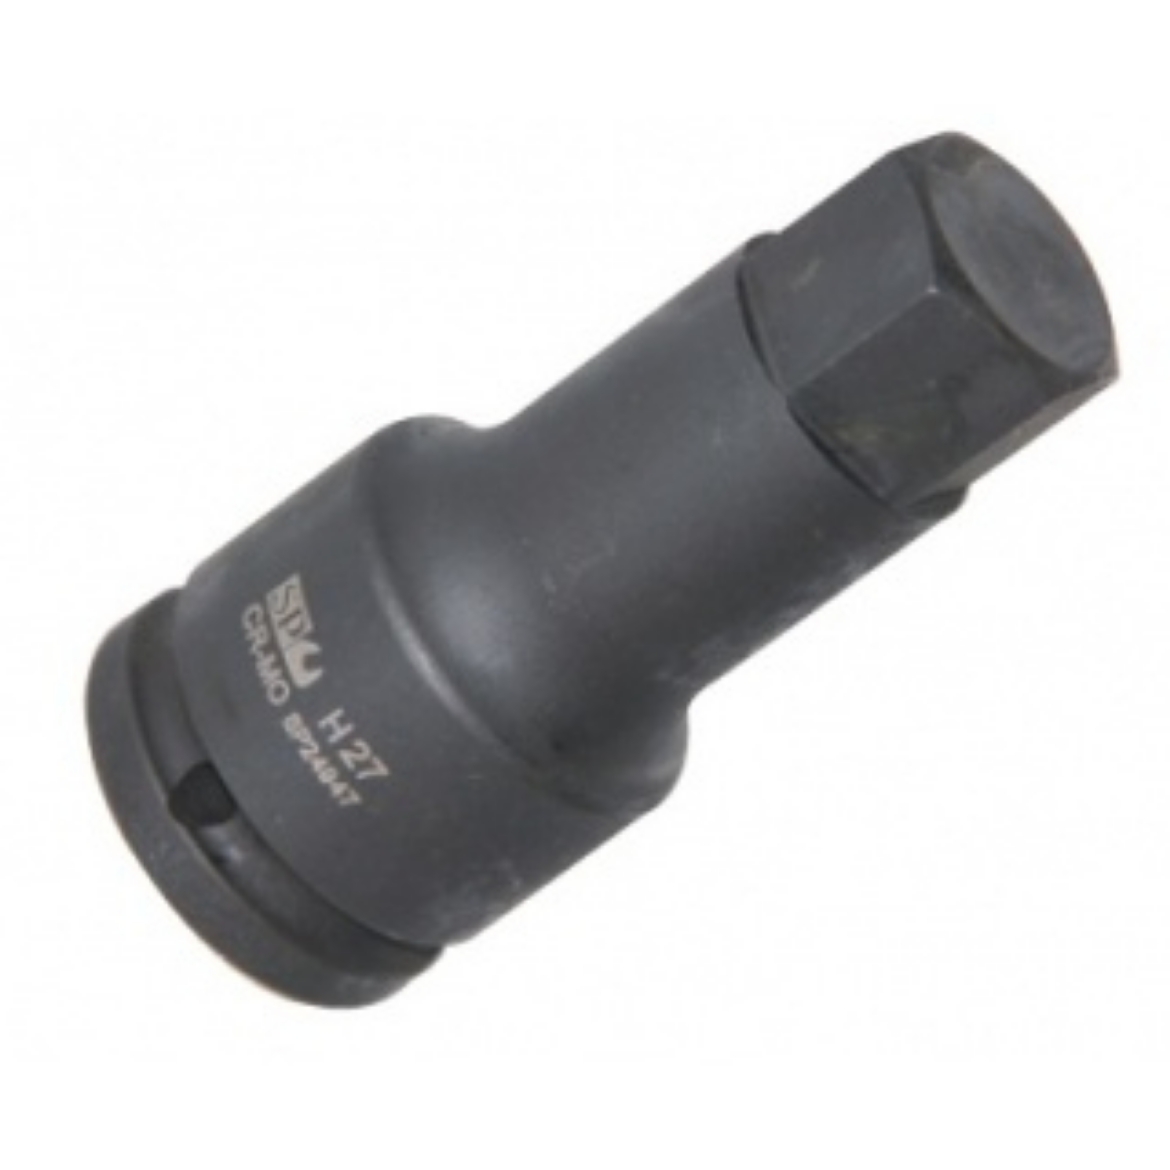 Picture of SOCKET IMPACT 3/4"DR INHEX METRIC 14MM SP TOOLS